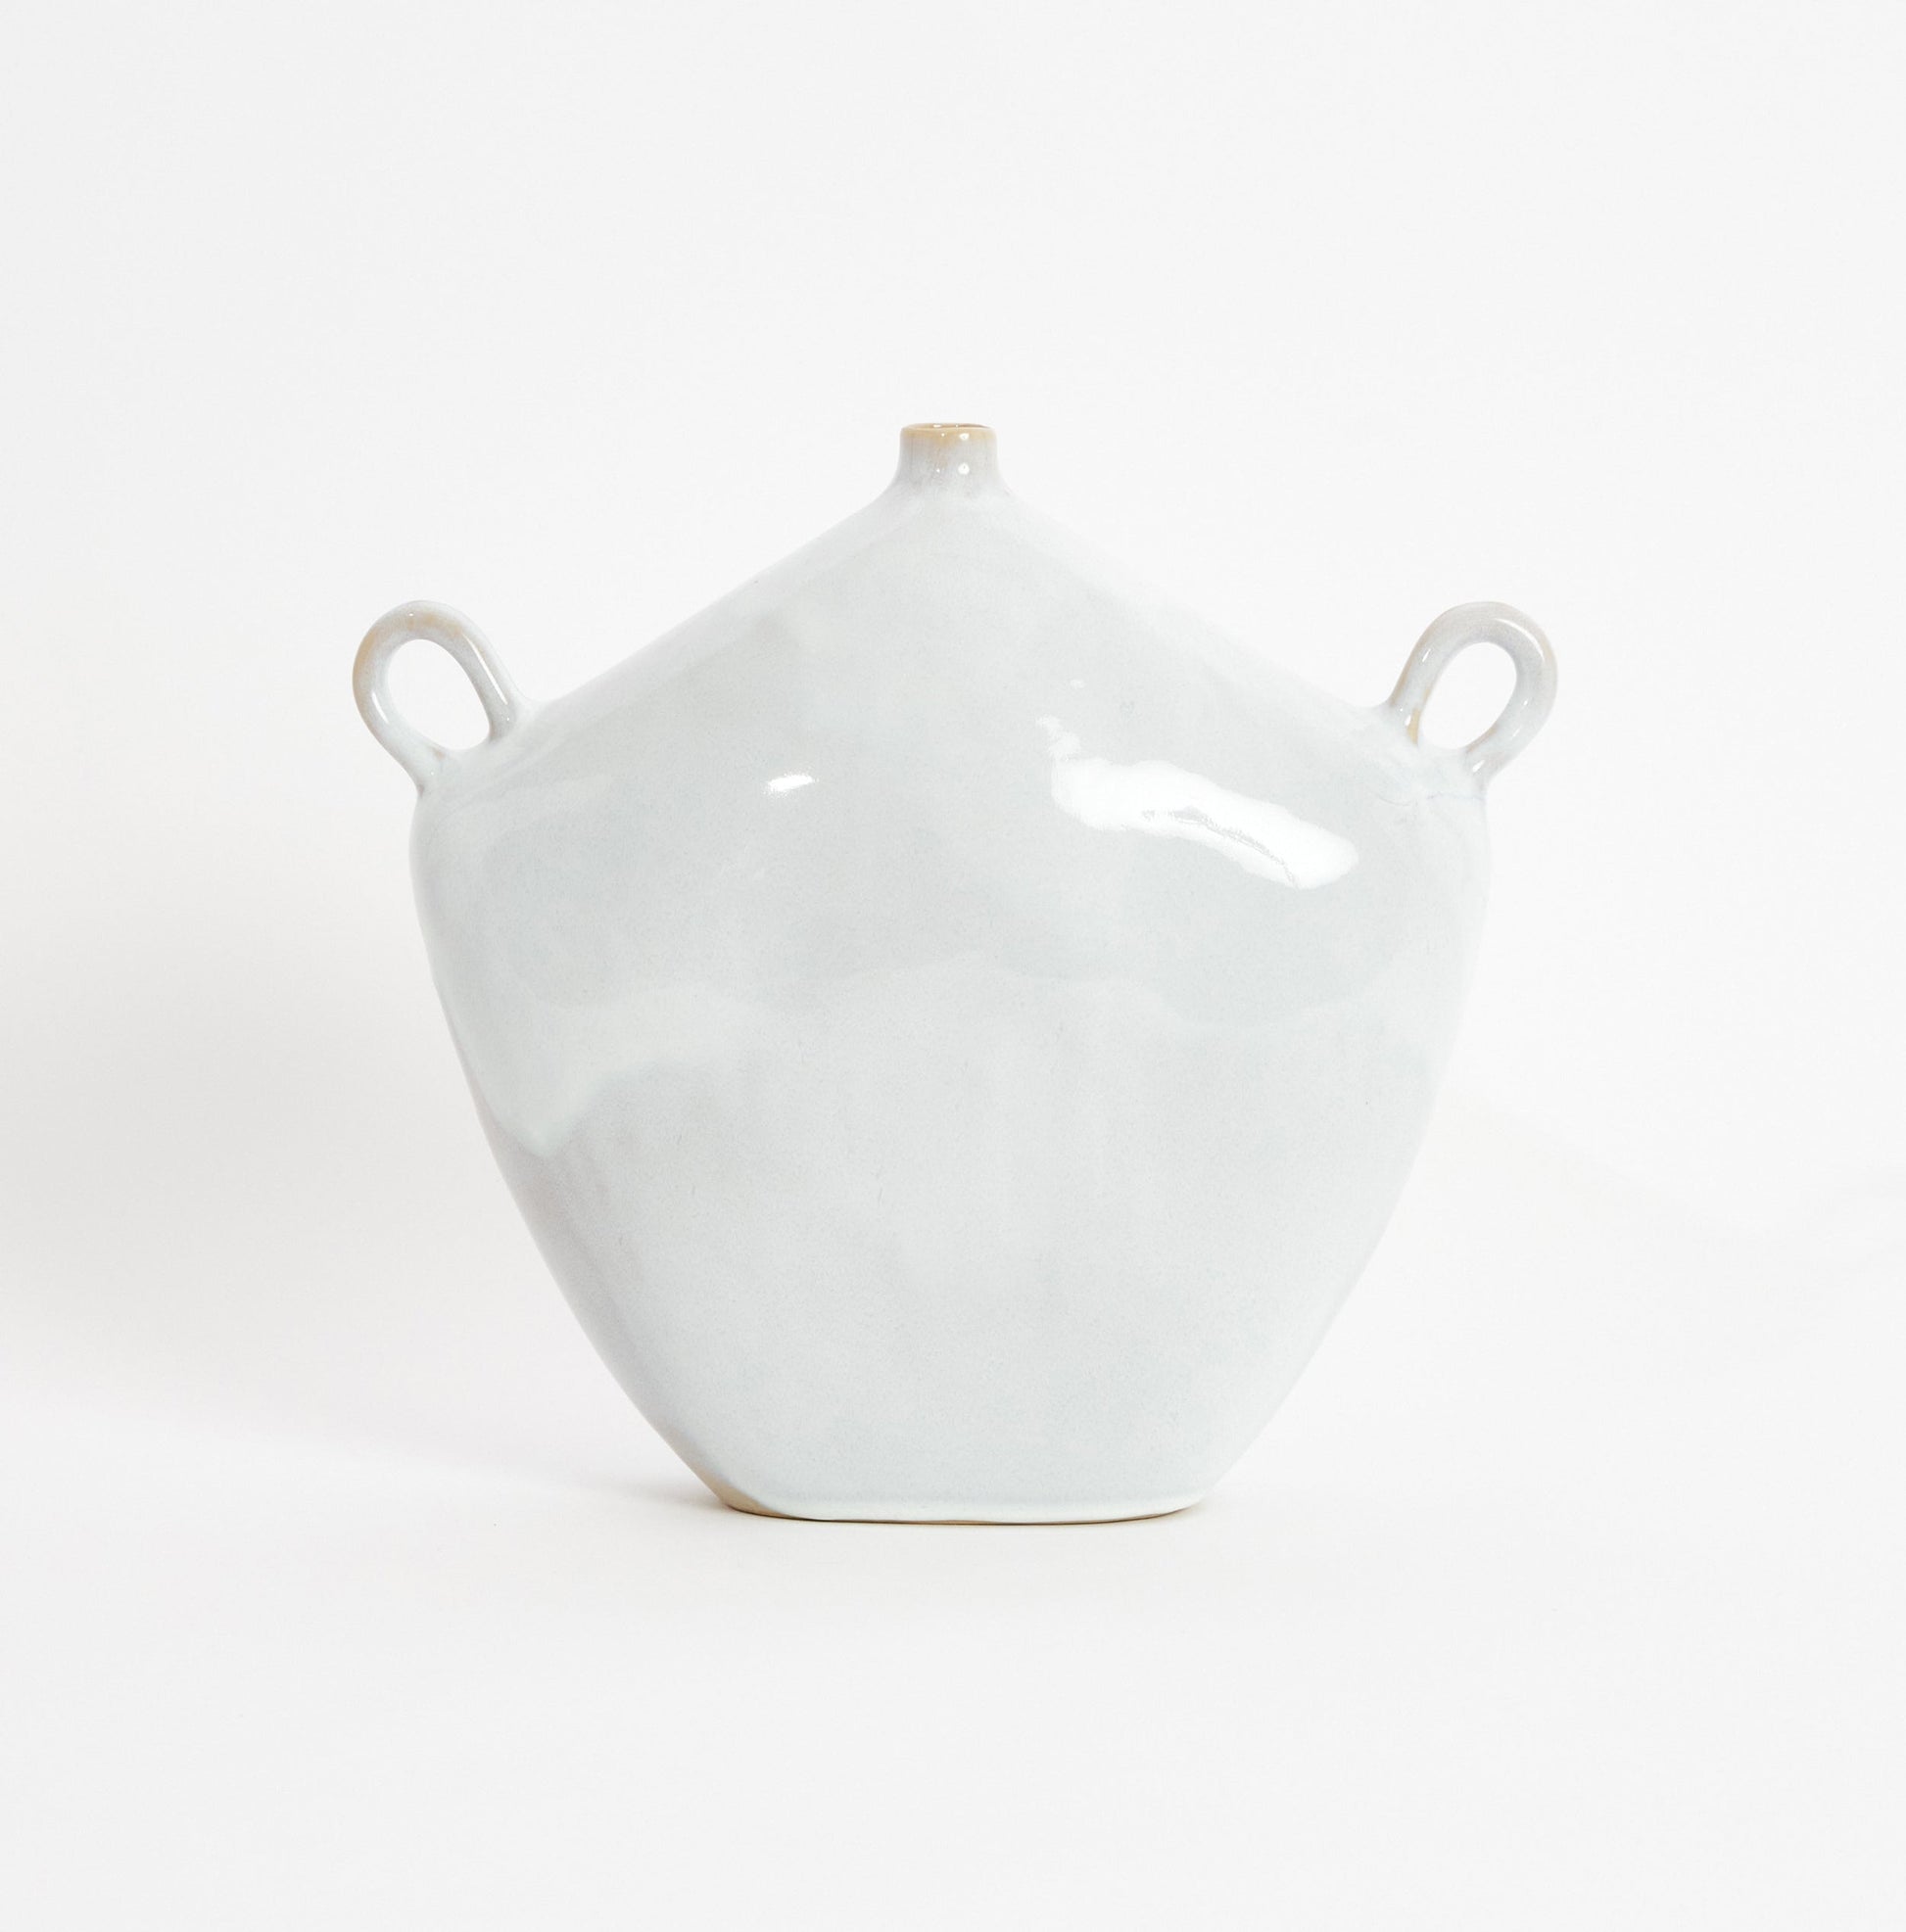 Maria Vessel in Whiny White Vases 